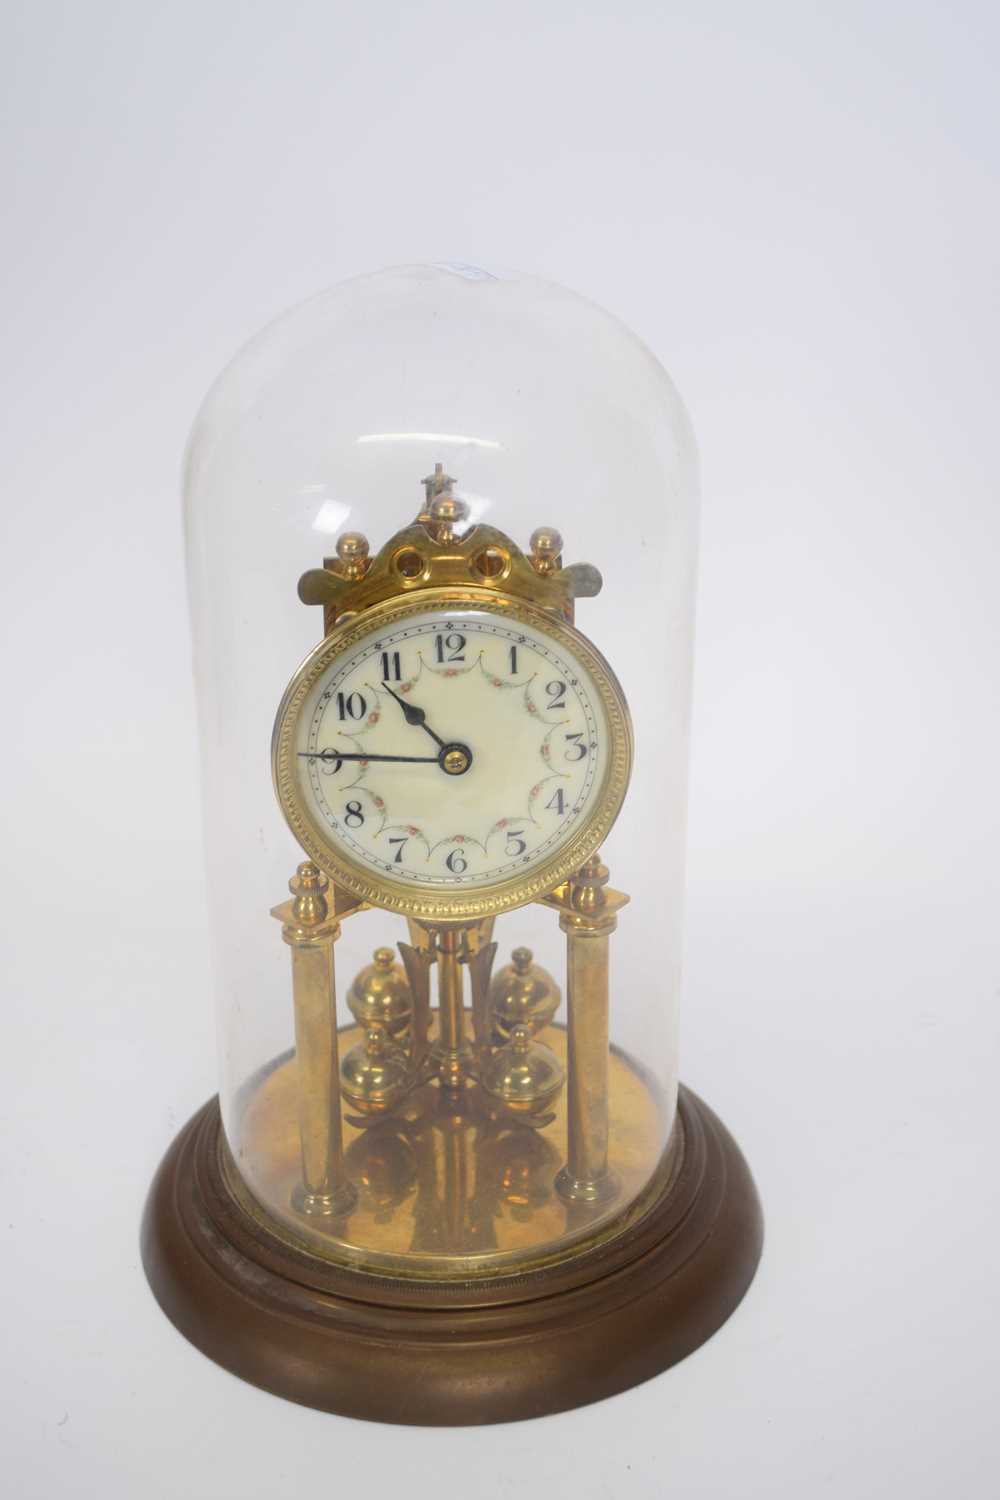 Early 20th century brass torsion or anniversary clock under a glass dome, 30cm high max